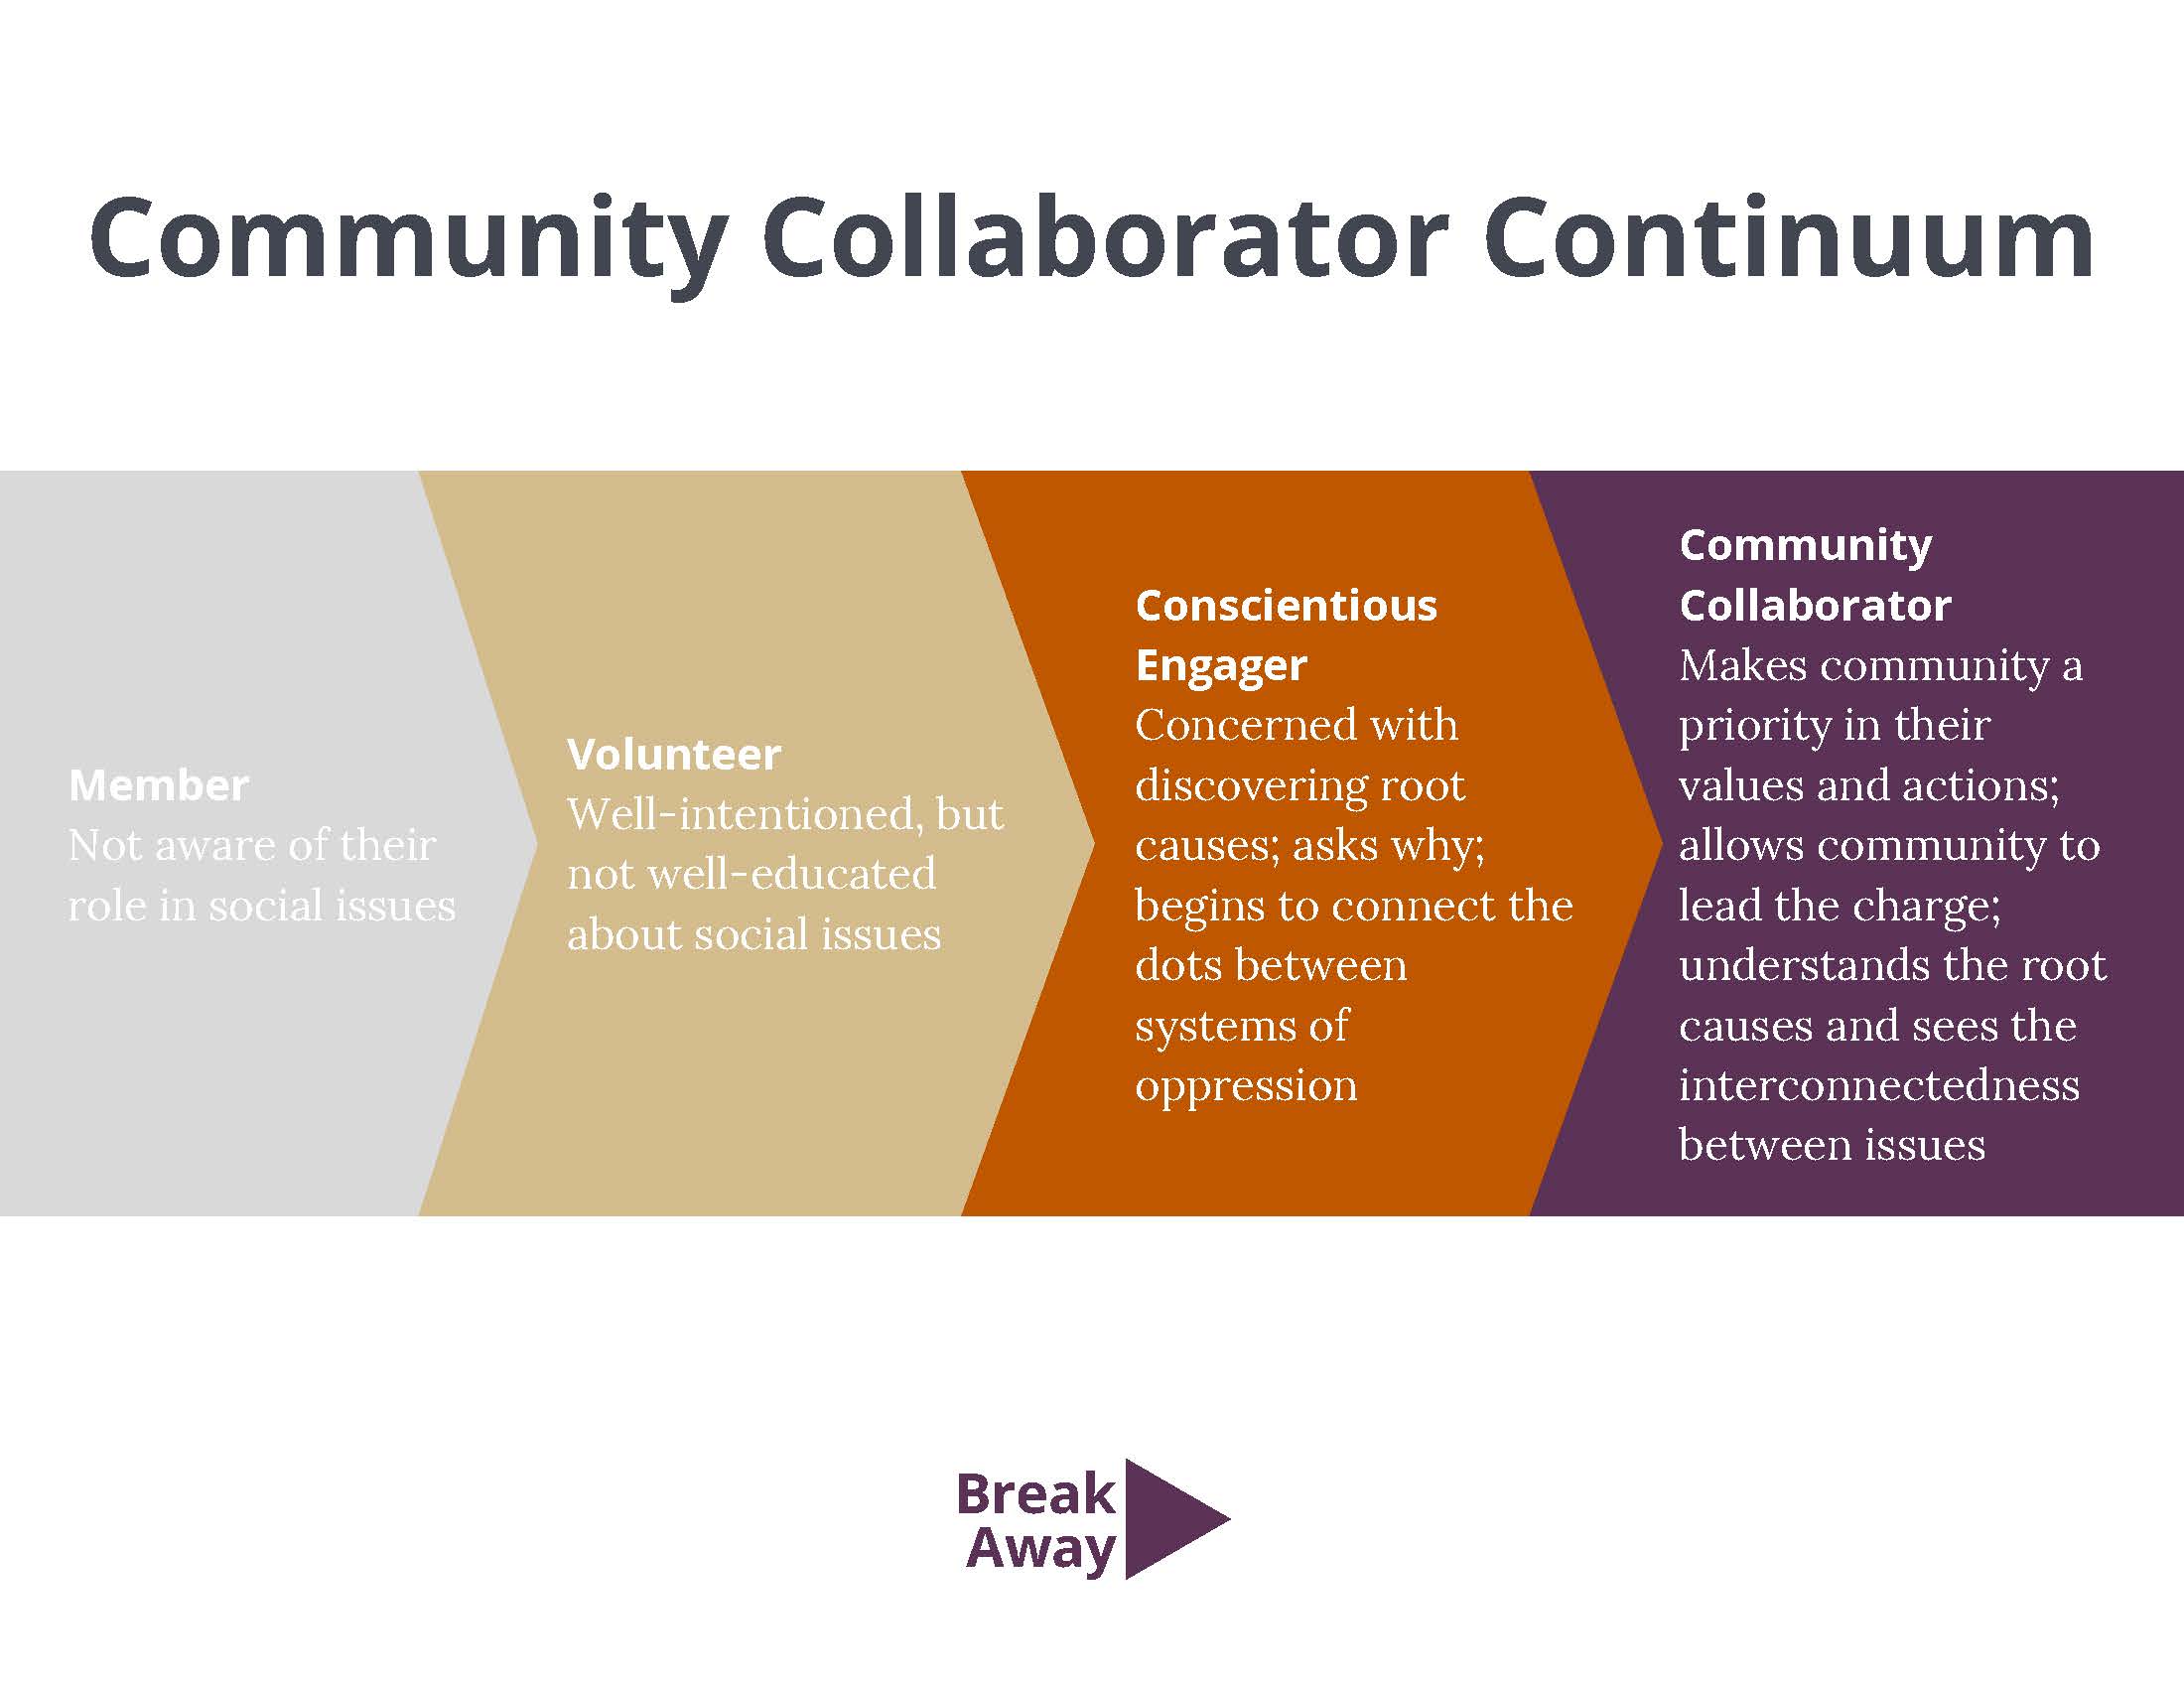 4 stages are shown: 1. Member Not aware of their role in social issues, 2. Volunteer Well-intentioned, but not well-educated about social issues, 3. Conscientious Engager Concerned with discovering root causes; asks why; begins to connect the dots between systems of oppression, 4. Community Collaborator Makes community a priority in their values and actions; allows community to lead the charge; understands the root causes and sees the interconnectedness between issues